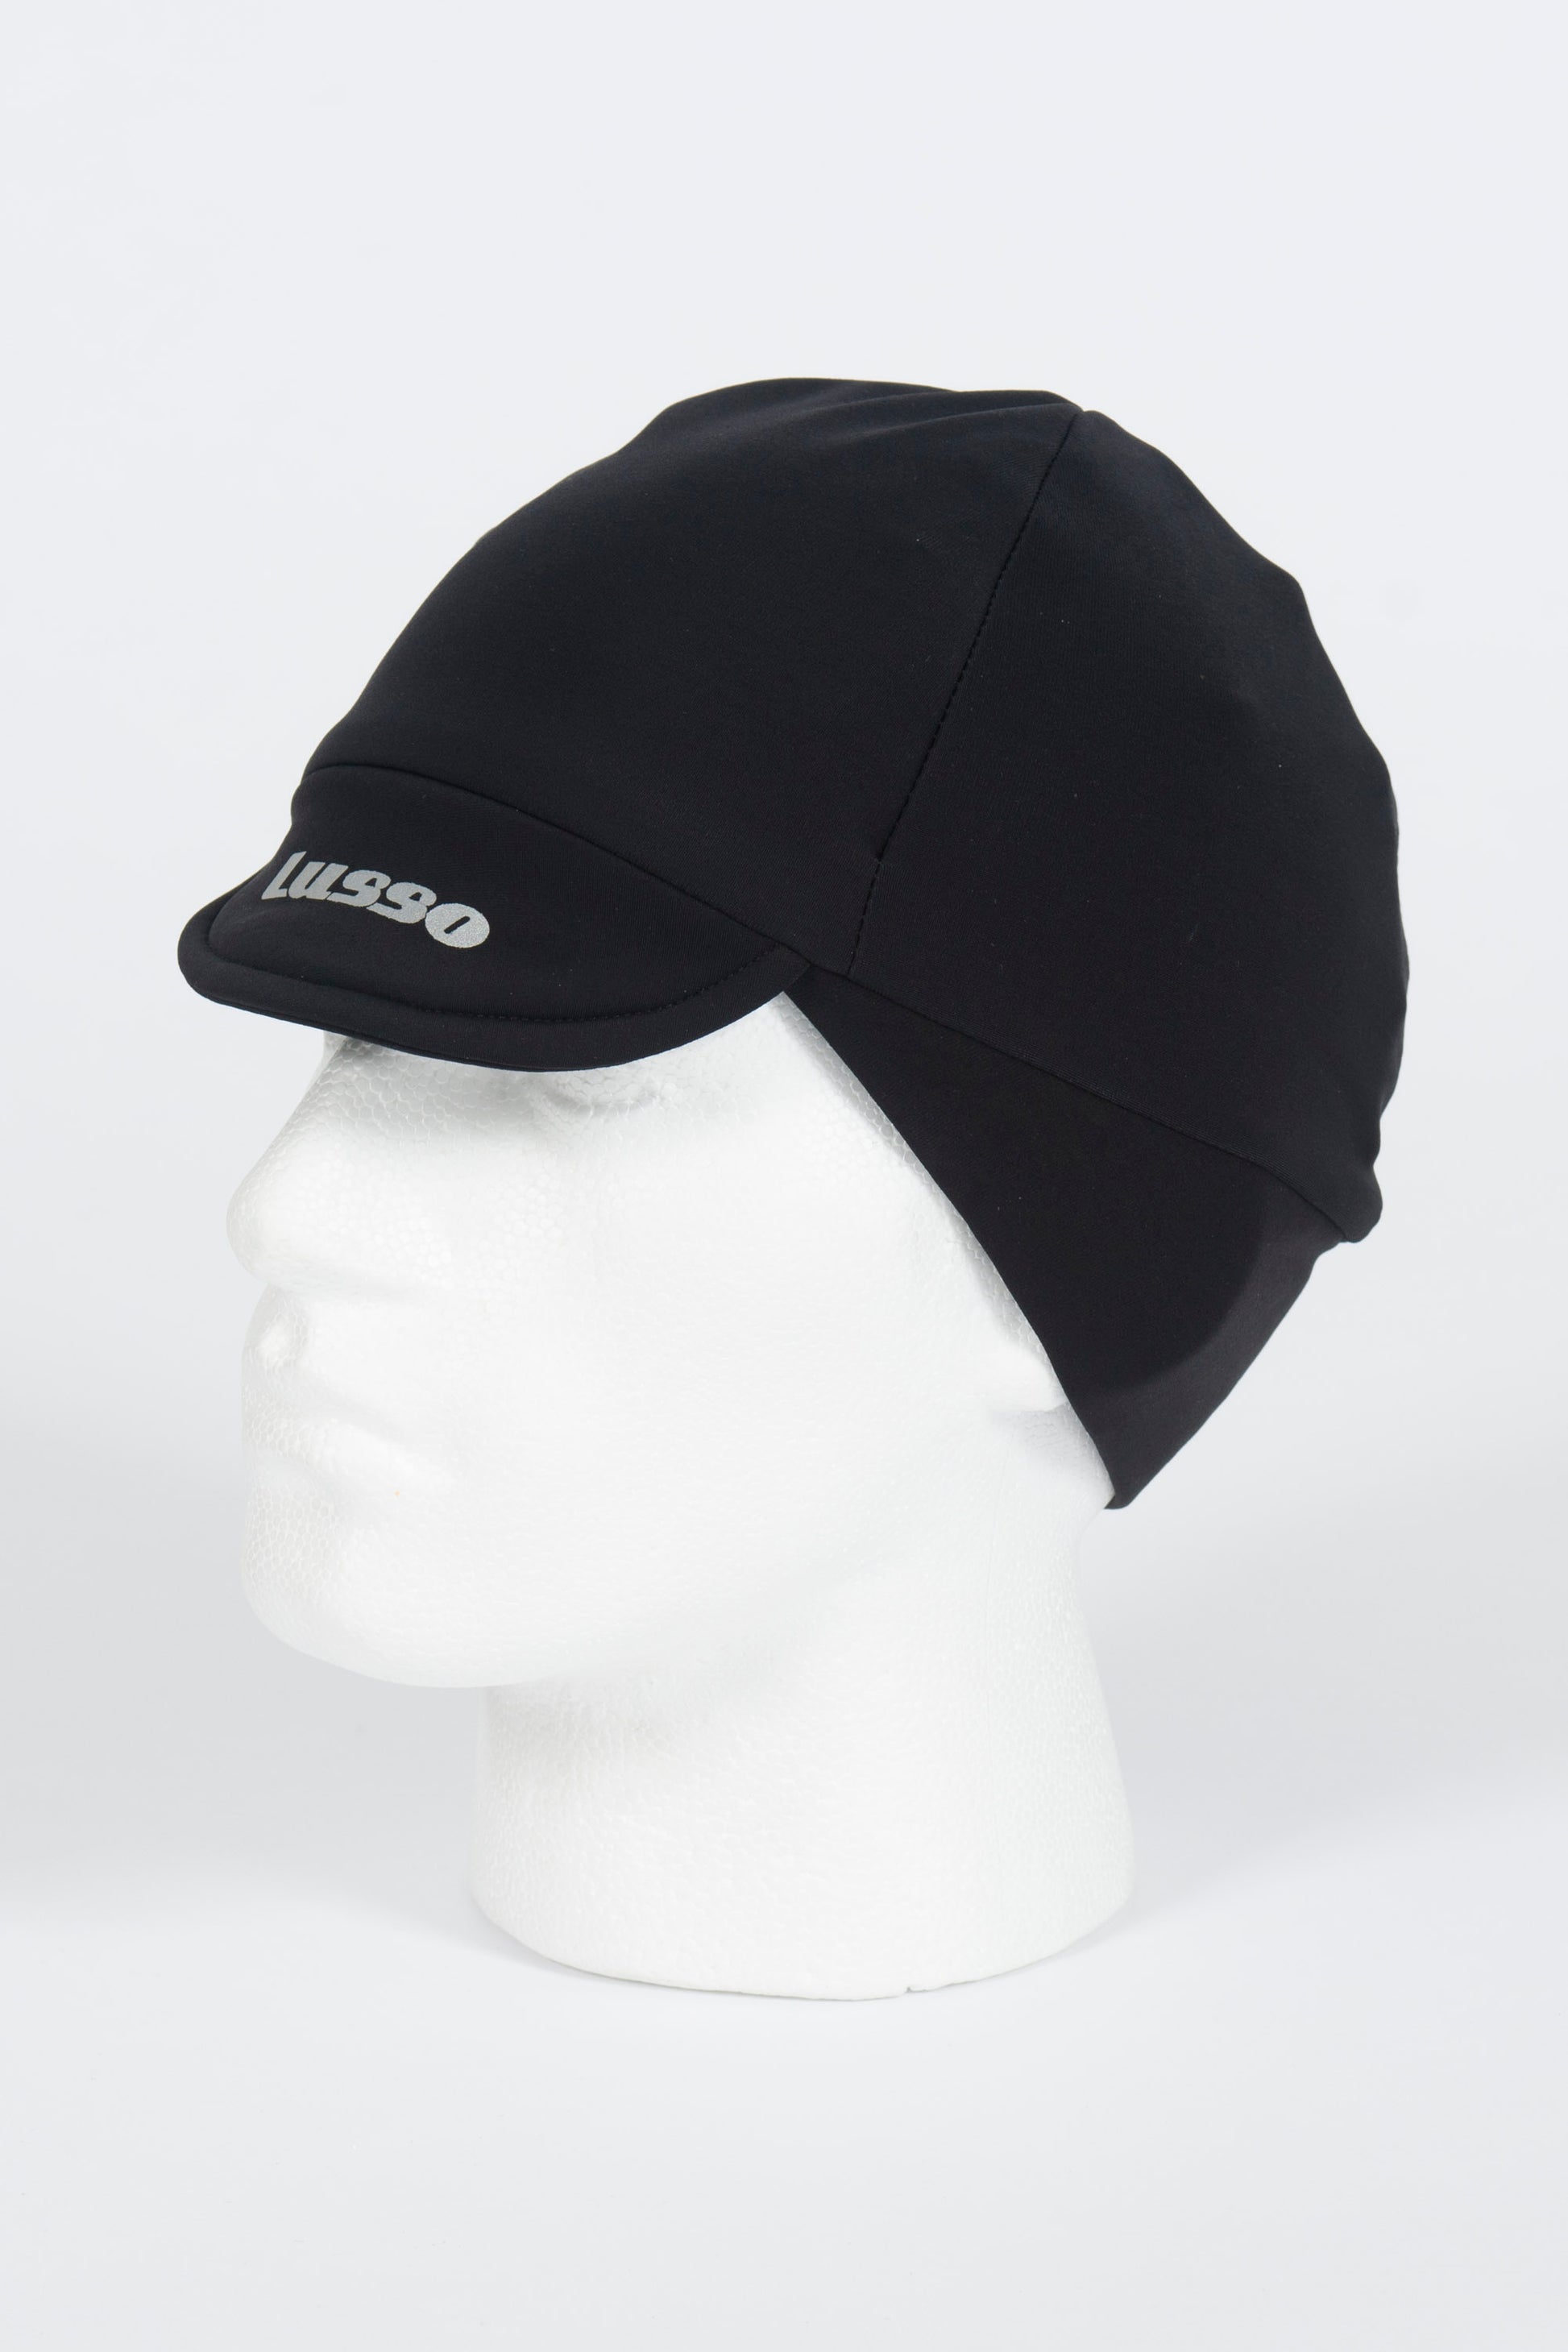 Repel Thermal Belgium Hat - Lusso Cycle Wear